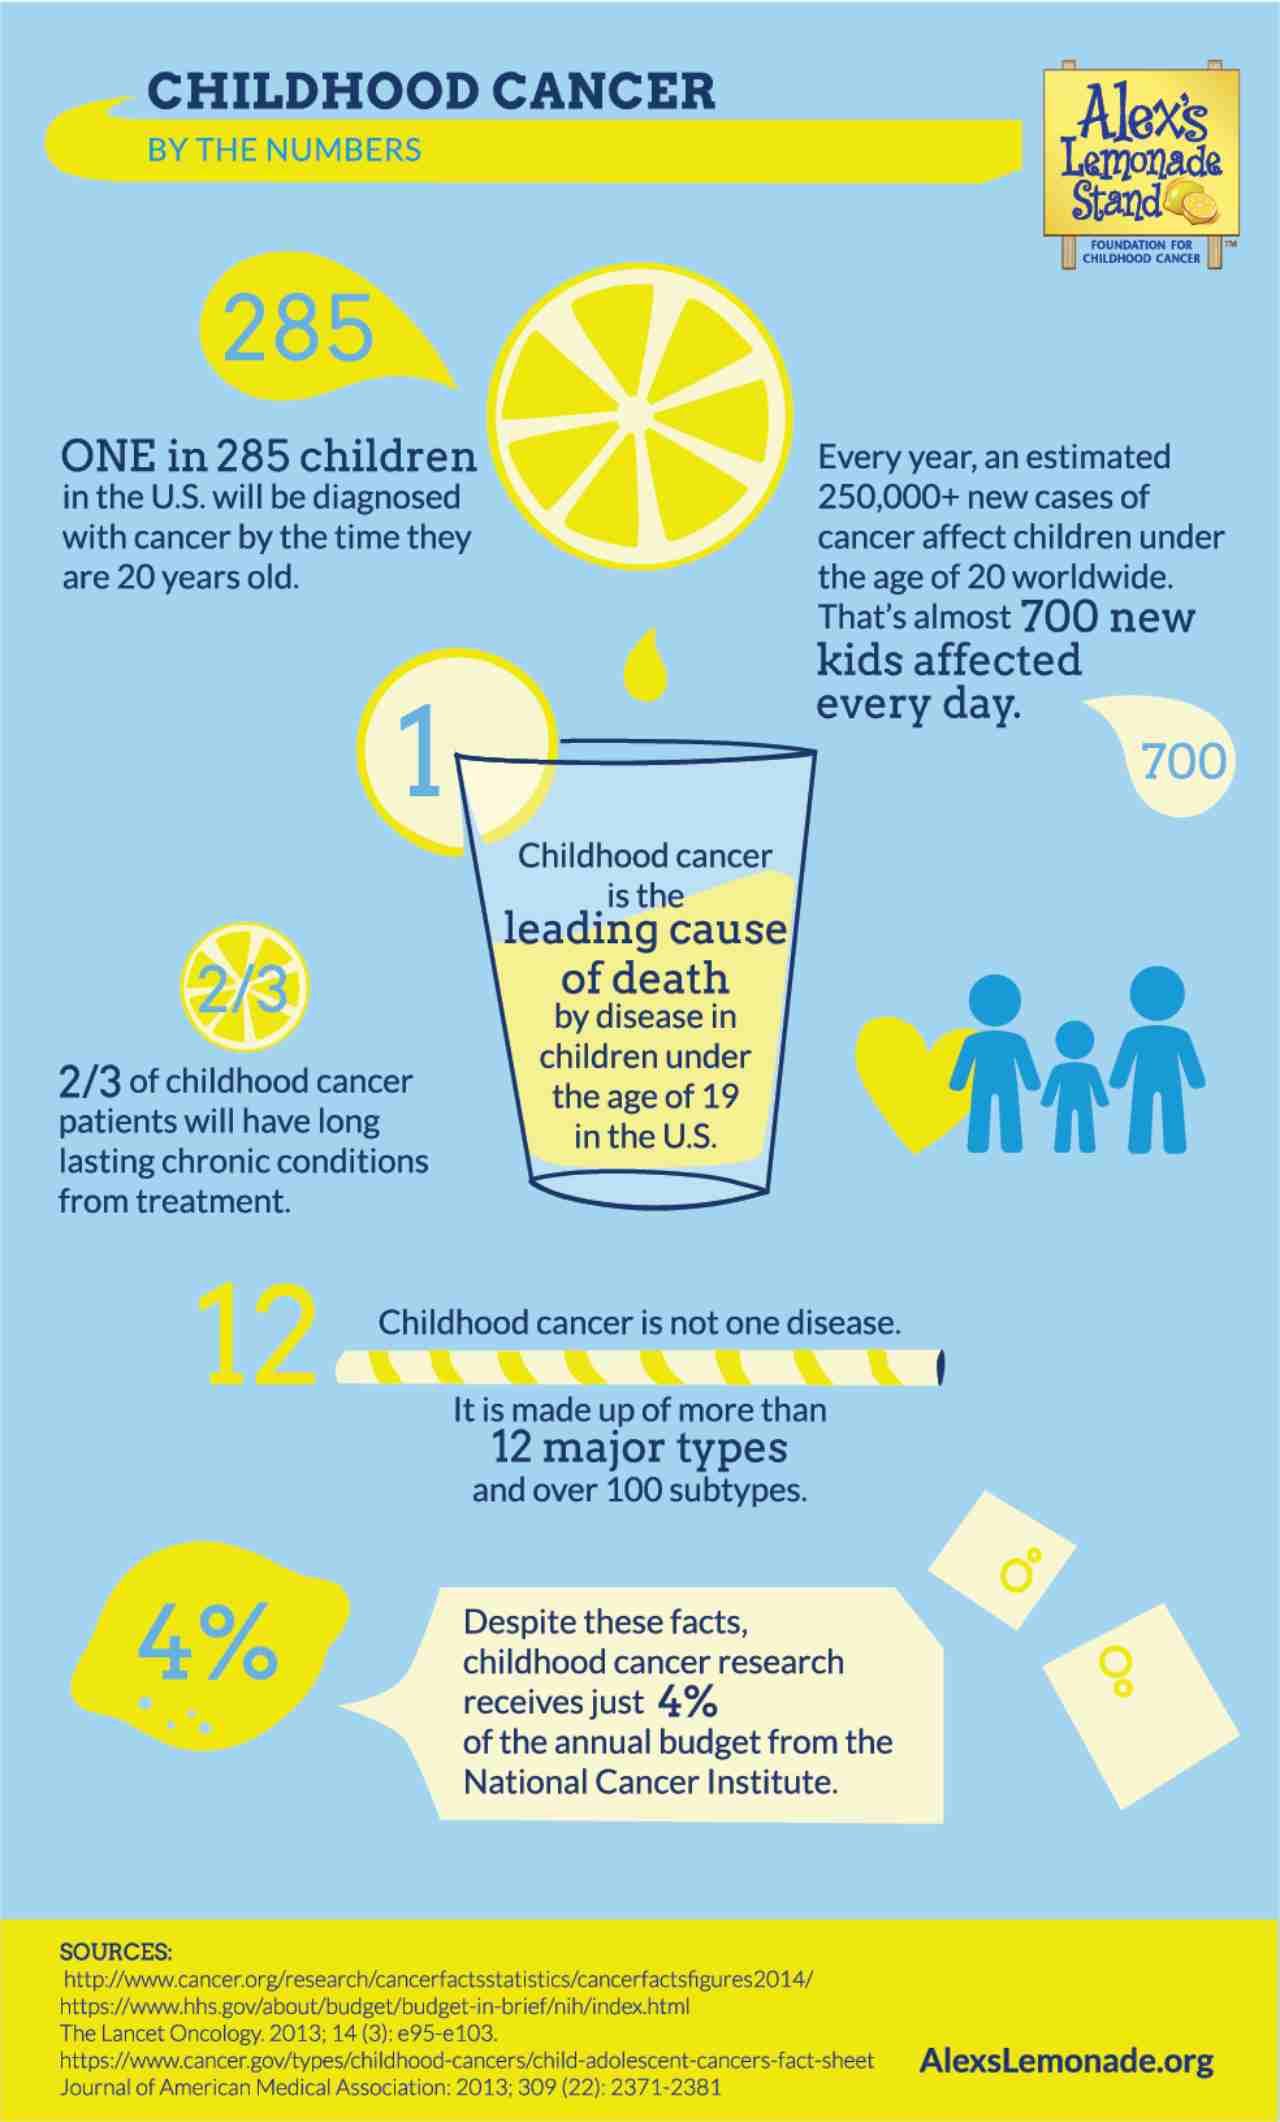 Some stats and numbers on cancer in children. Image credit: AlexsLemonade.org